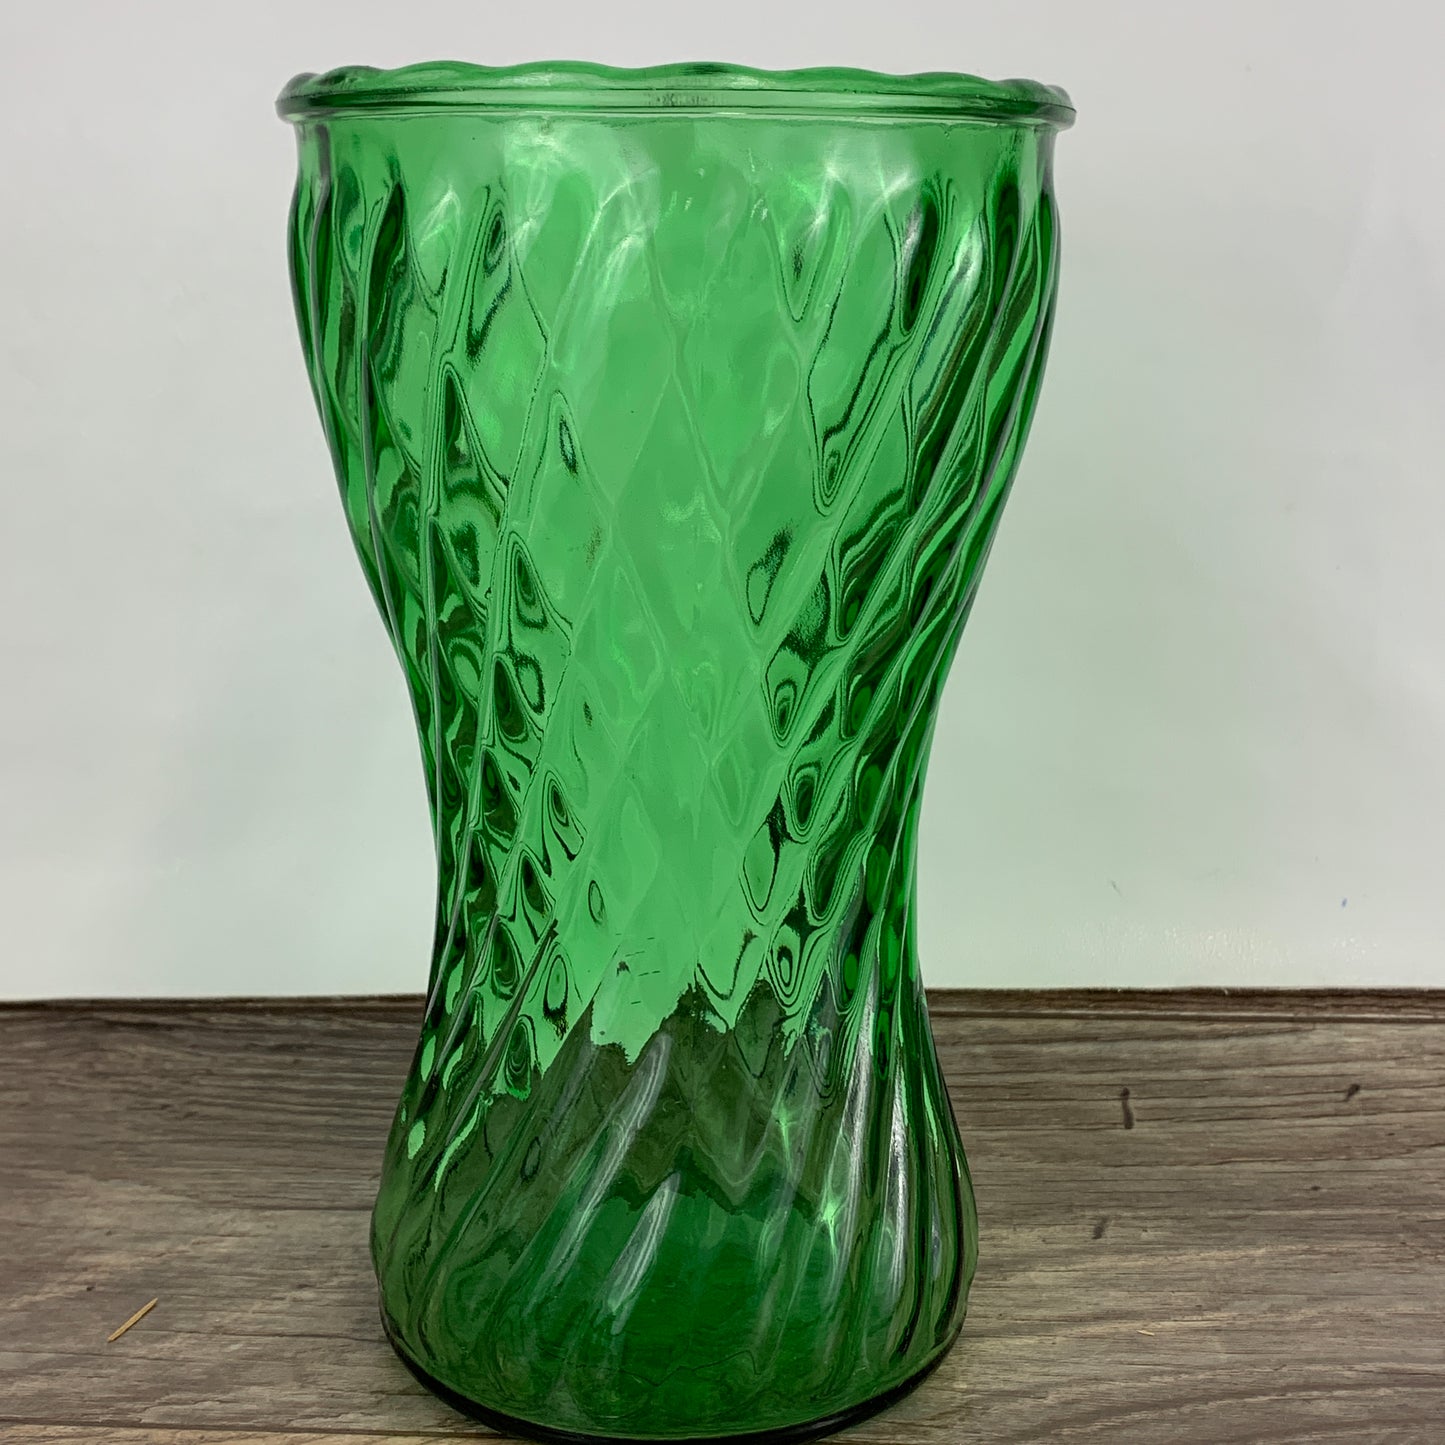 Tall Green Vintage Vase with Swirl Pattern, Large Green Vase